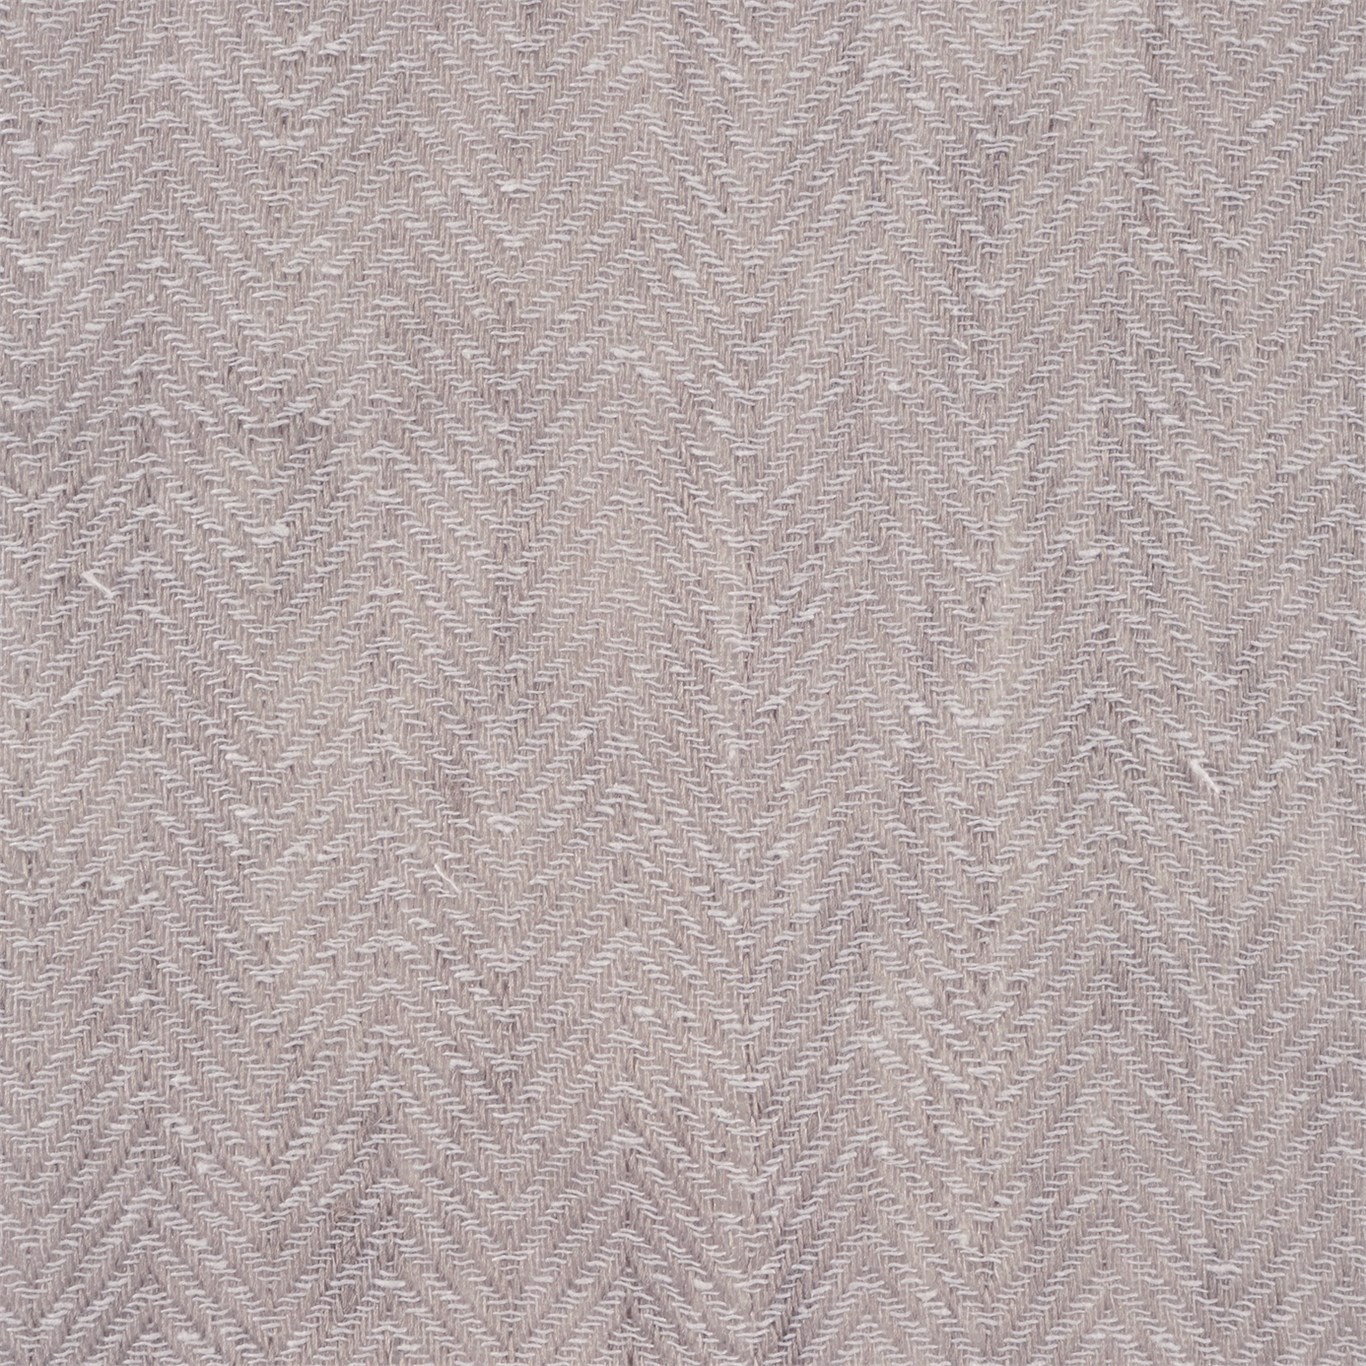 Purity Voiles Parchment Fabric by HAR